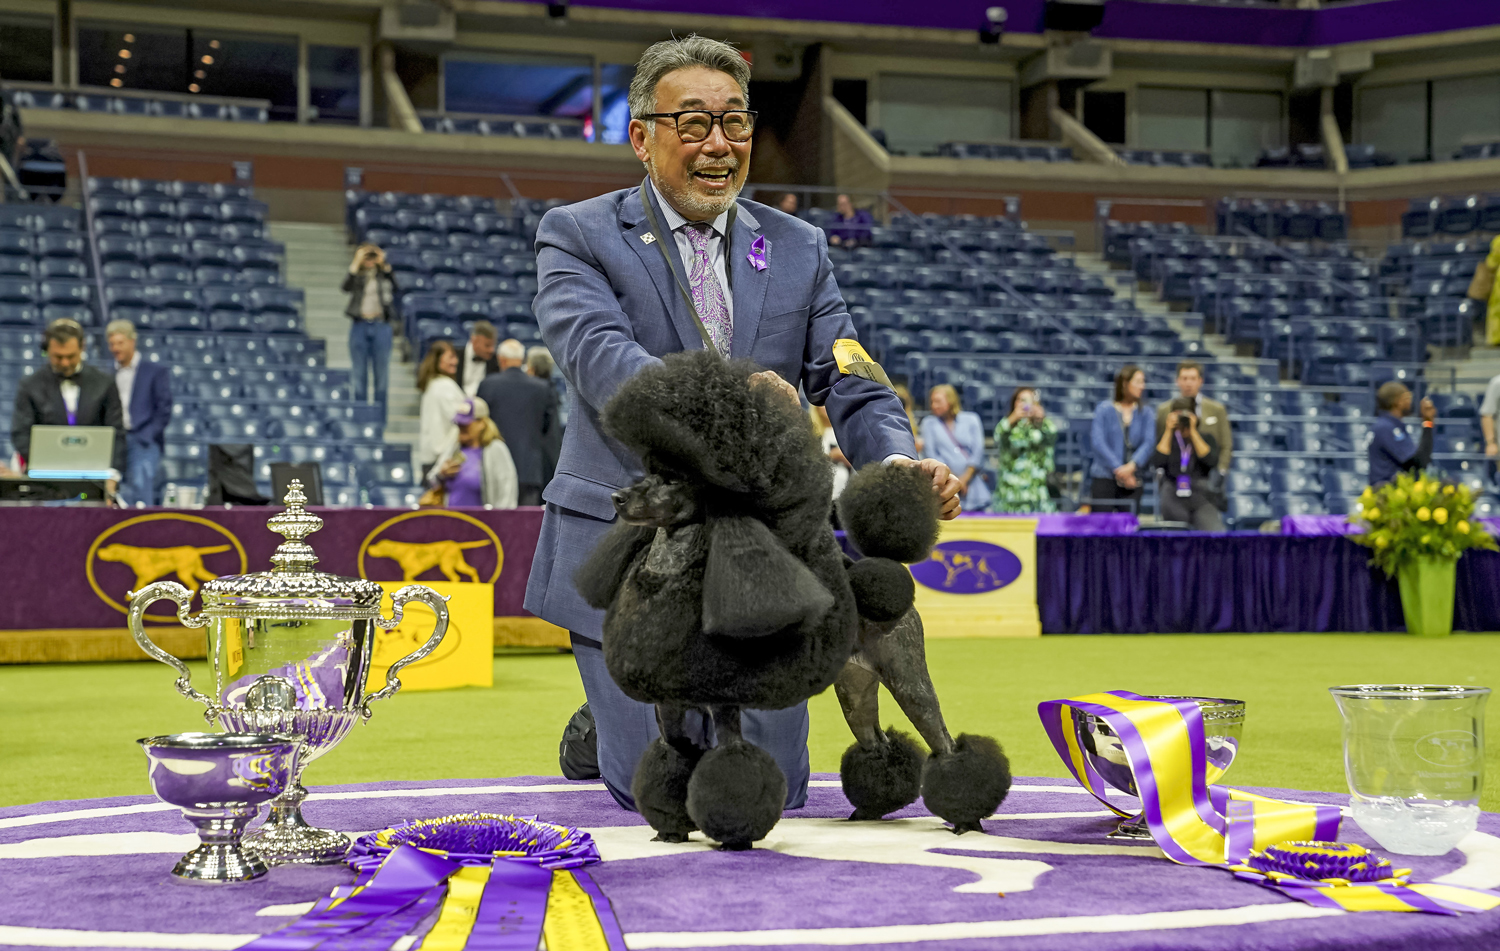 A man in an arena kneels behind a groomed black poodle and next to a trophy and ribbons.